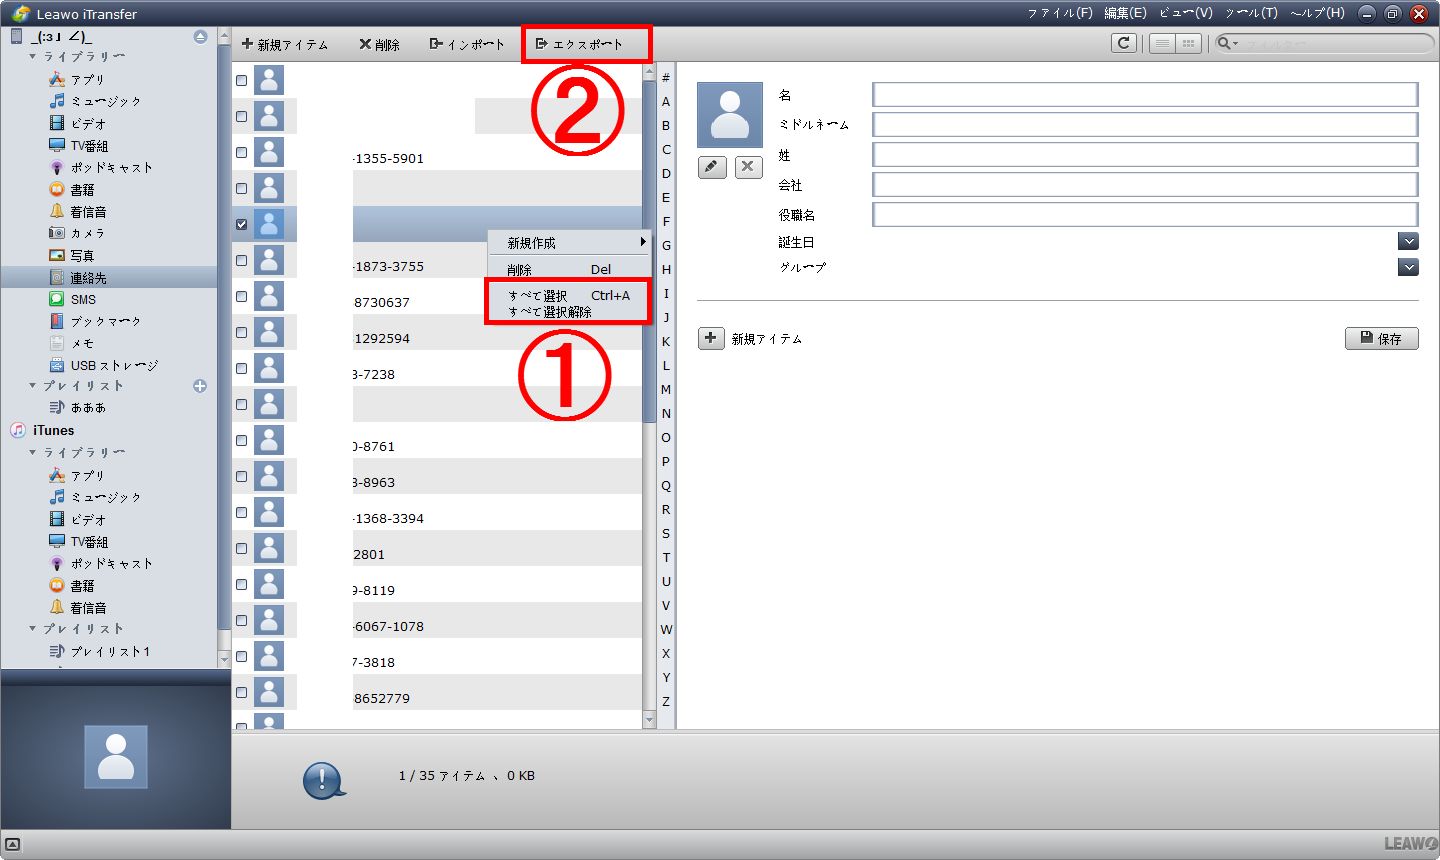 click Contacts in library